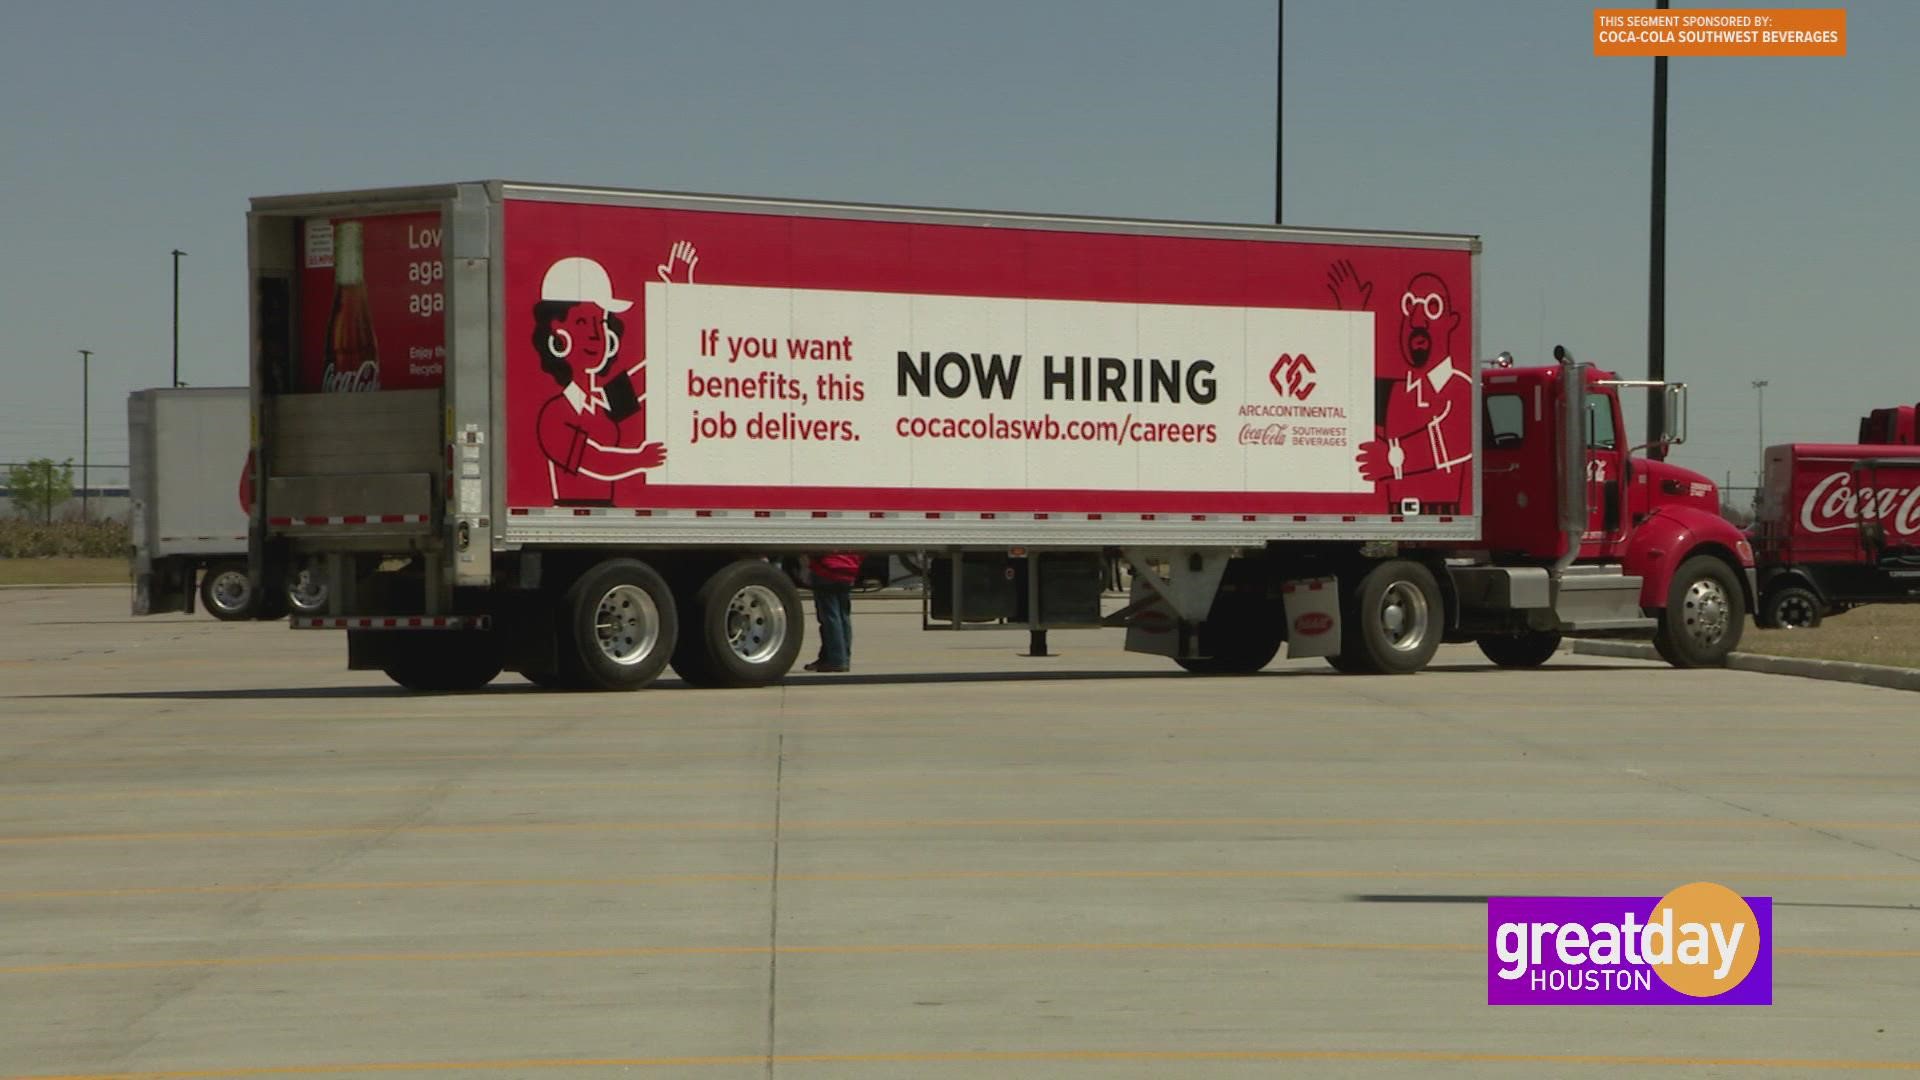 Coca-Cola Southwest Beverages took out an ad in the Super Bowl and scored big!